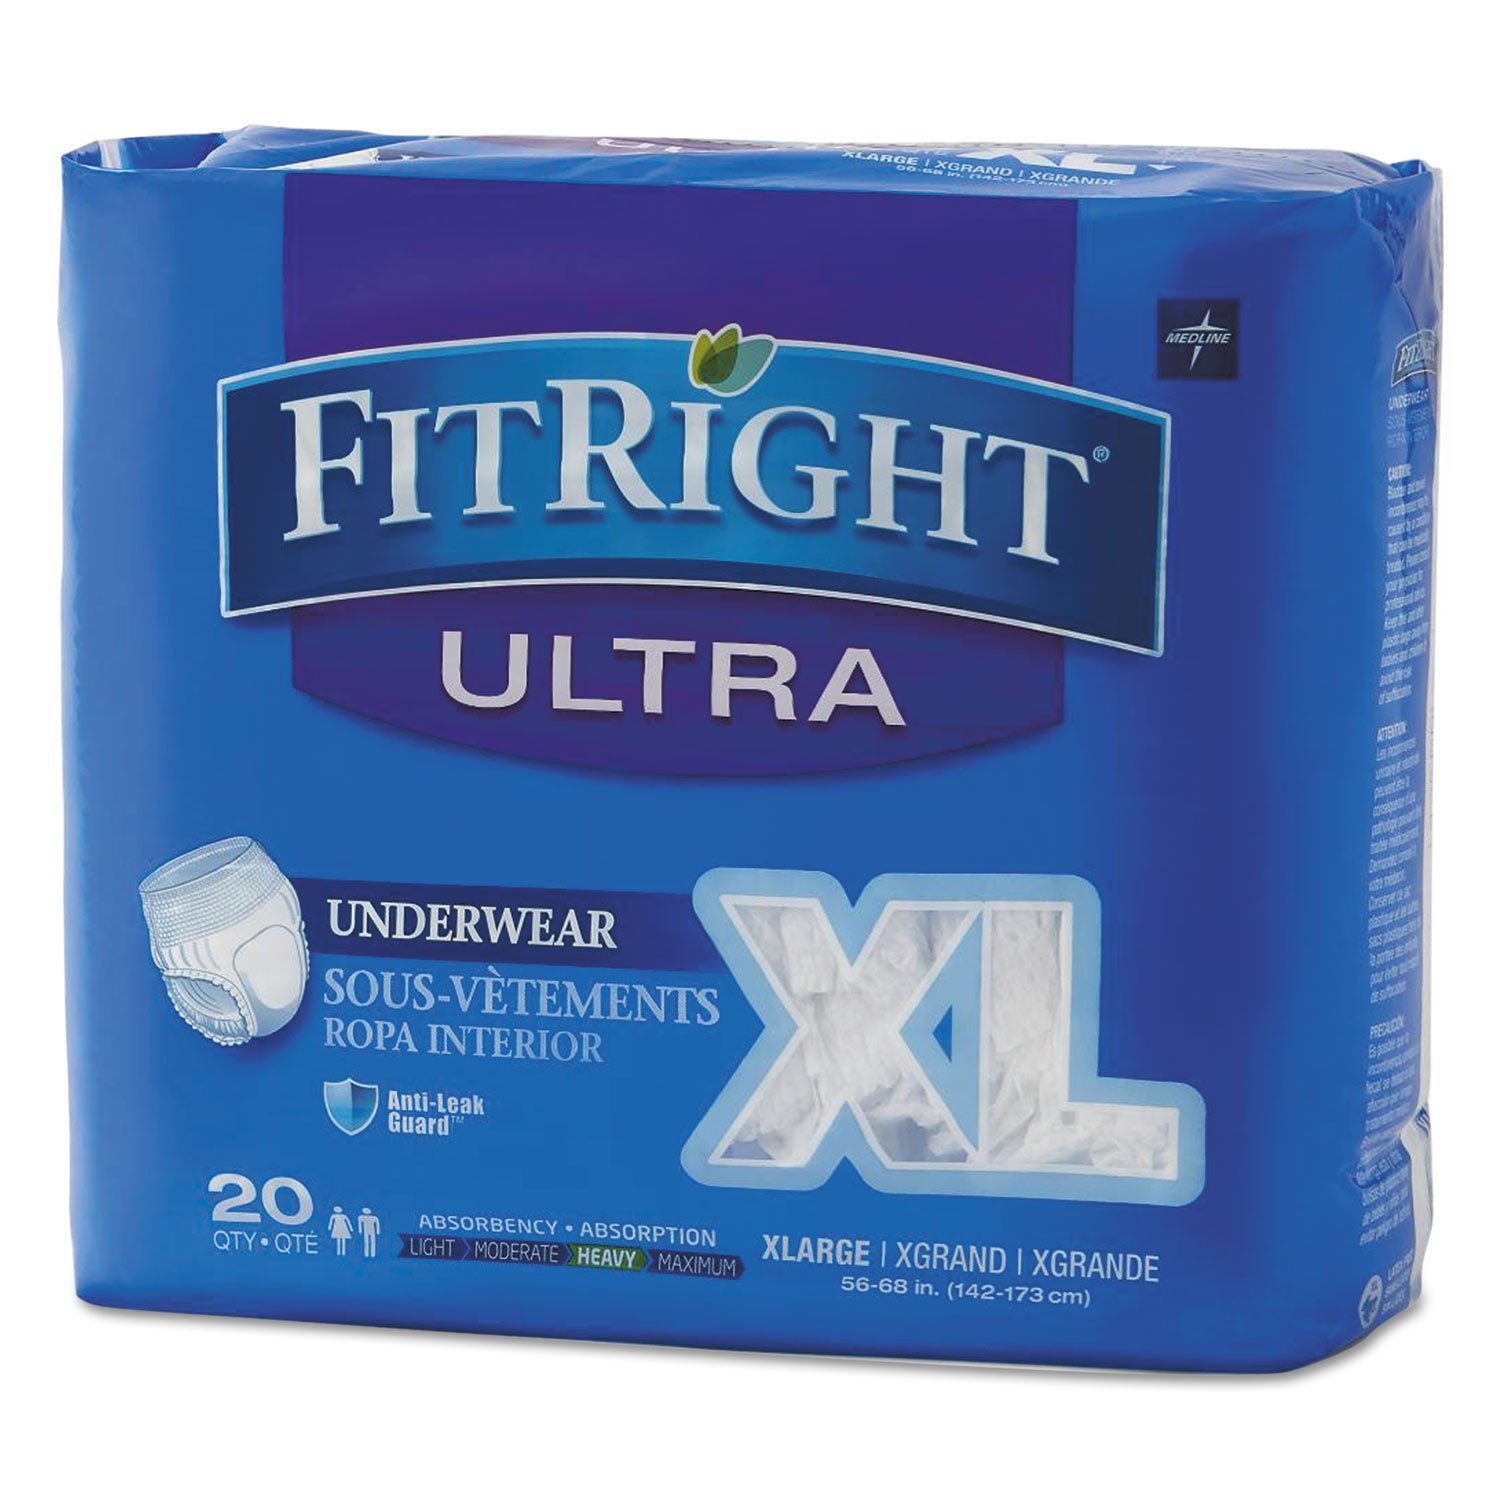 fitright-ultra-protective-underwear-x-large-56-to-68-waist-20-pack-4-pack-carton_miifit23600act - 1